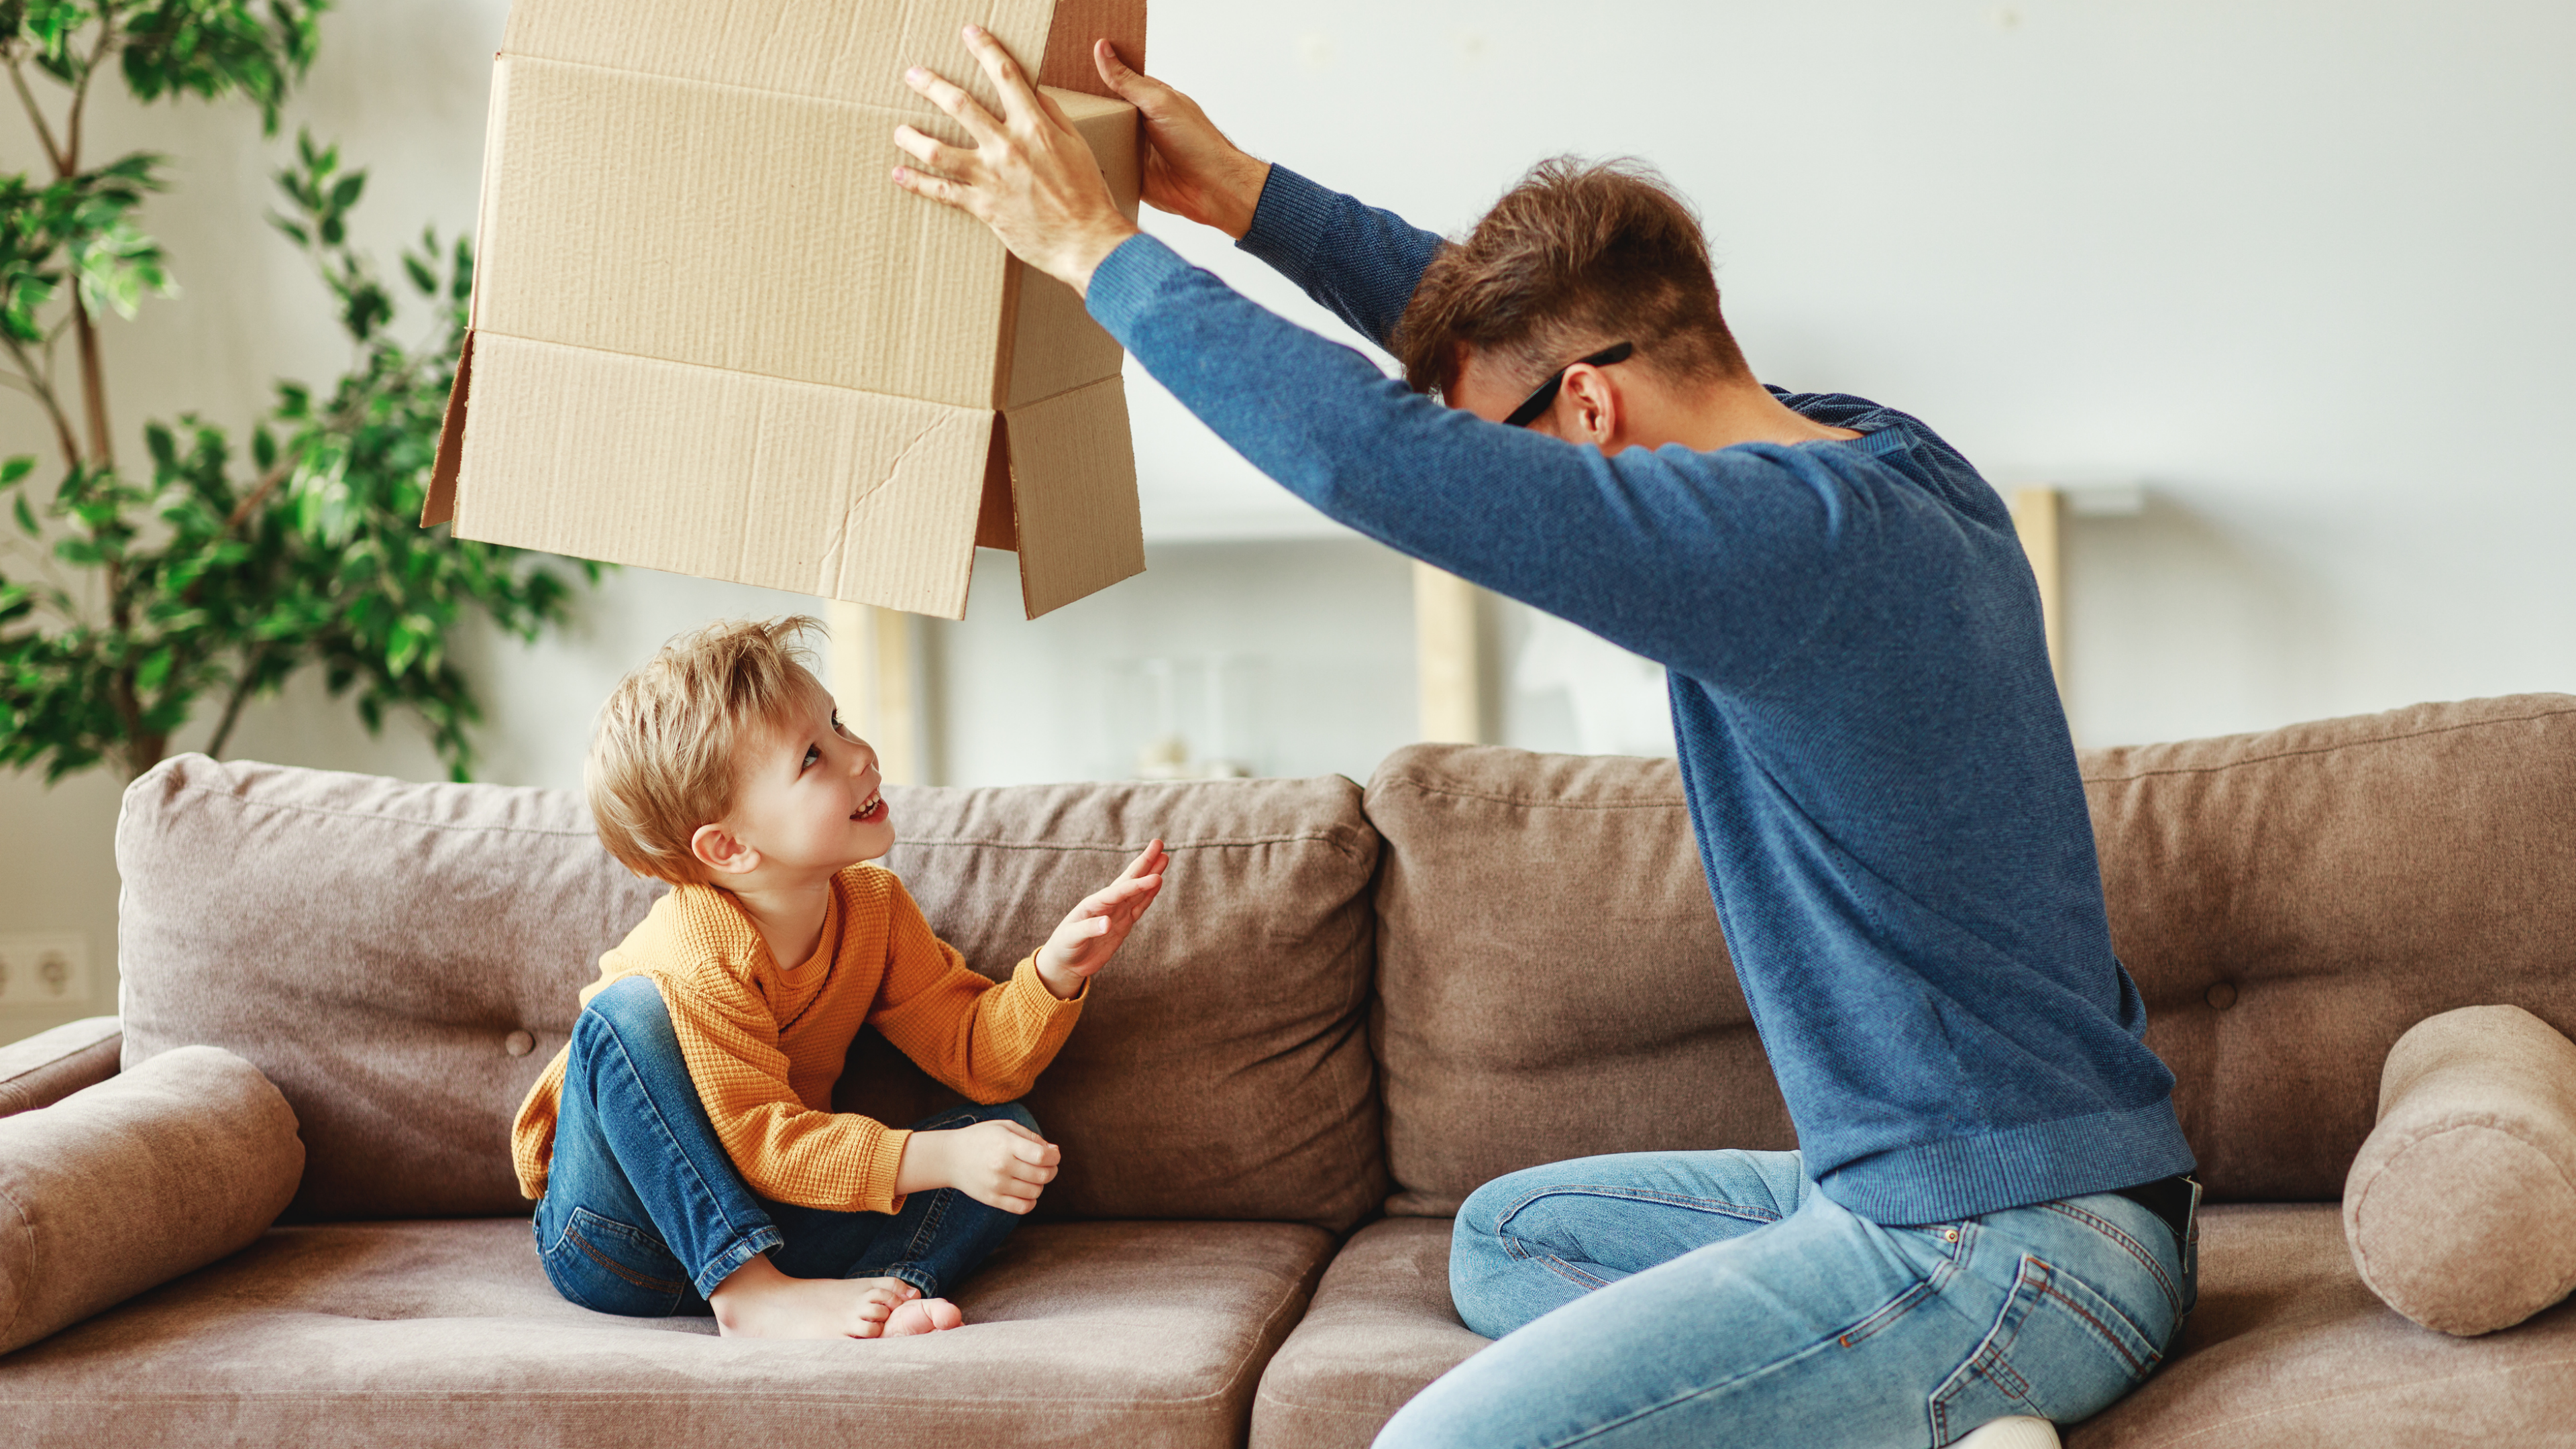 Side view of adult man lifting carton box over smiling boy while sitting on sofa and playing at home together